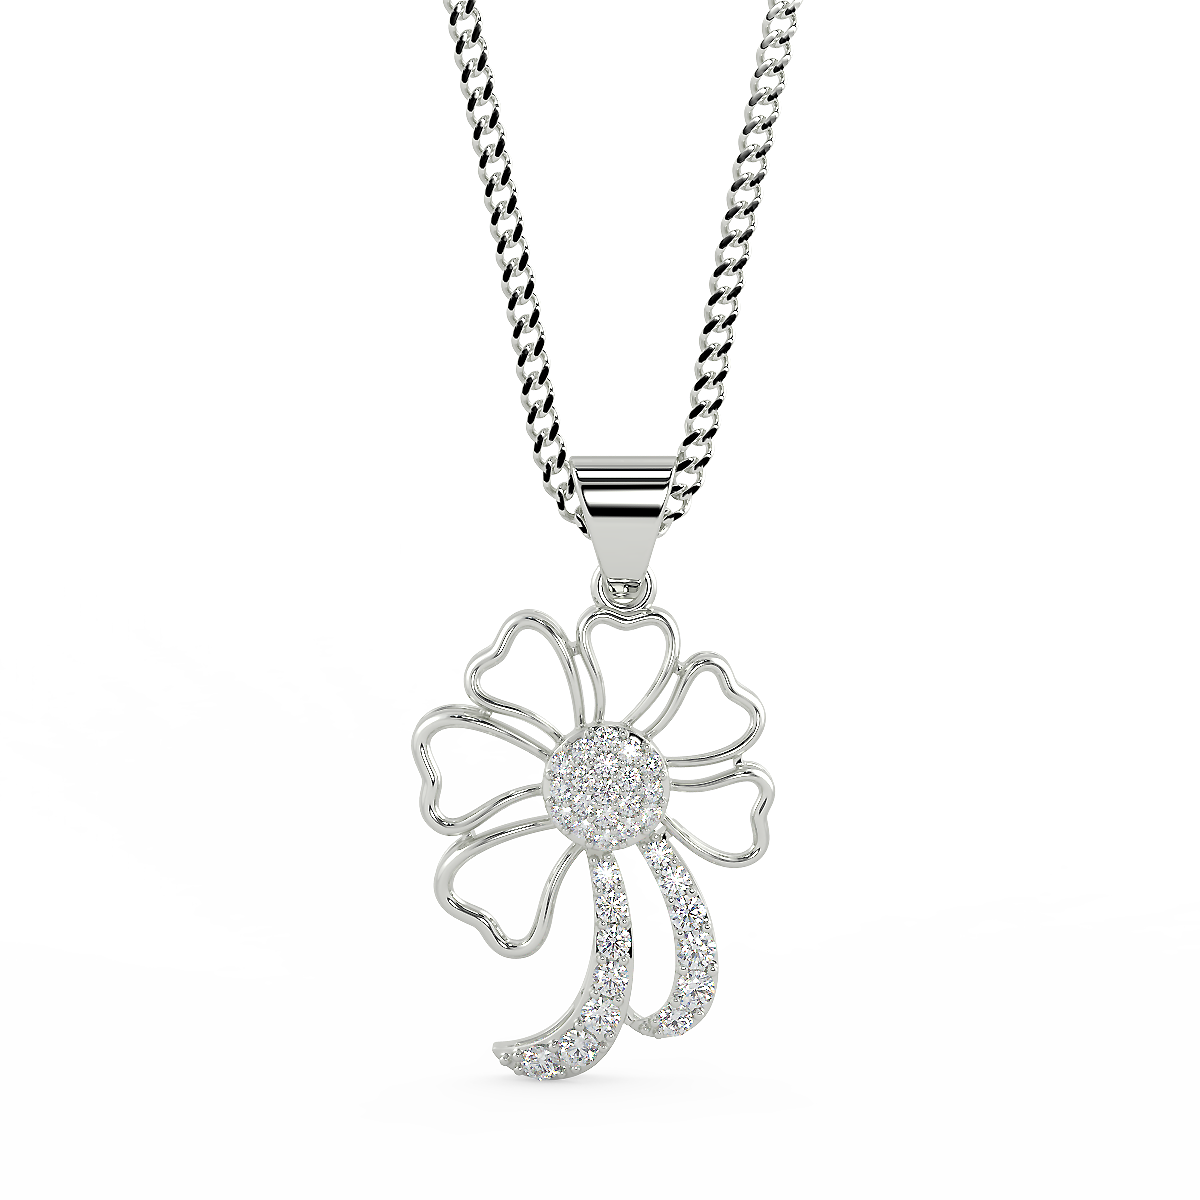 The Iris Set (925 Sterling Silver)